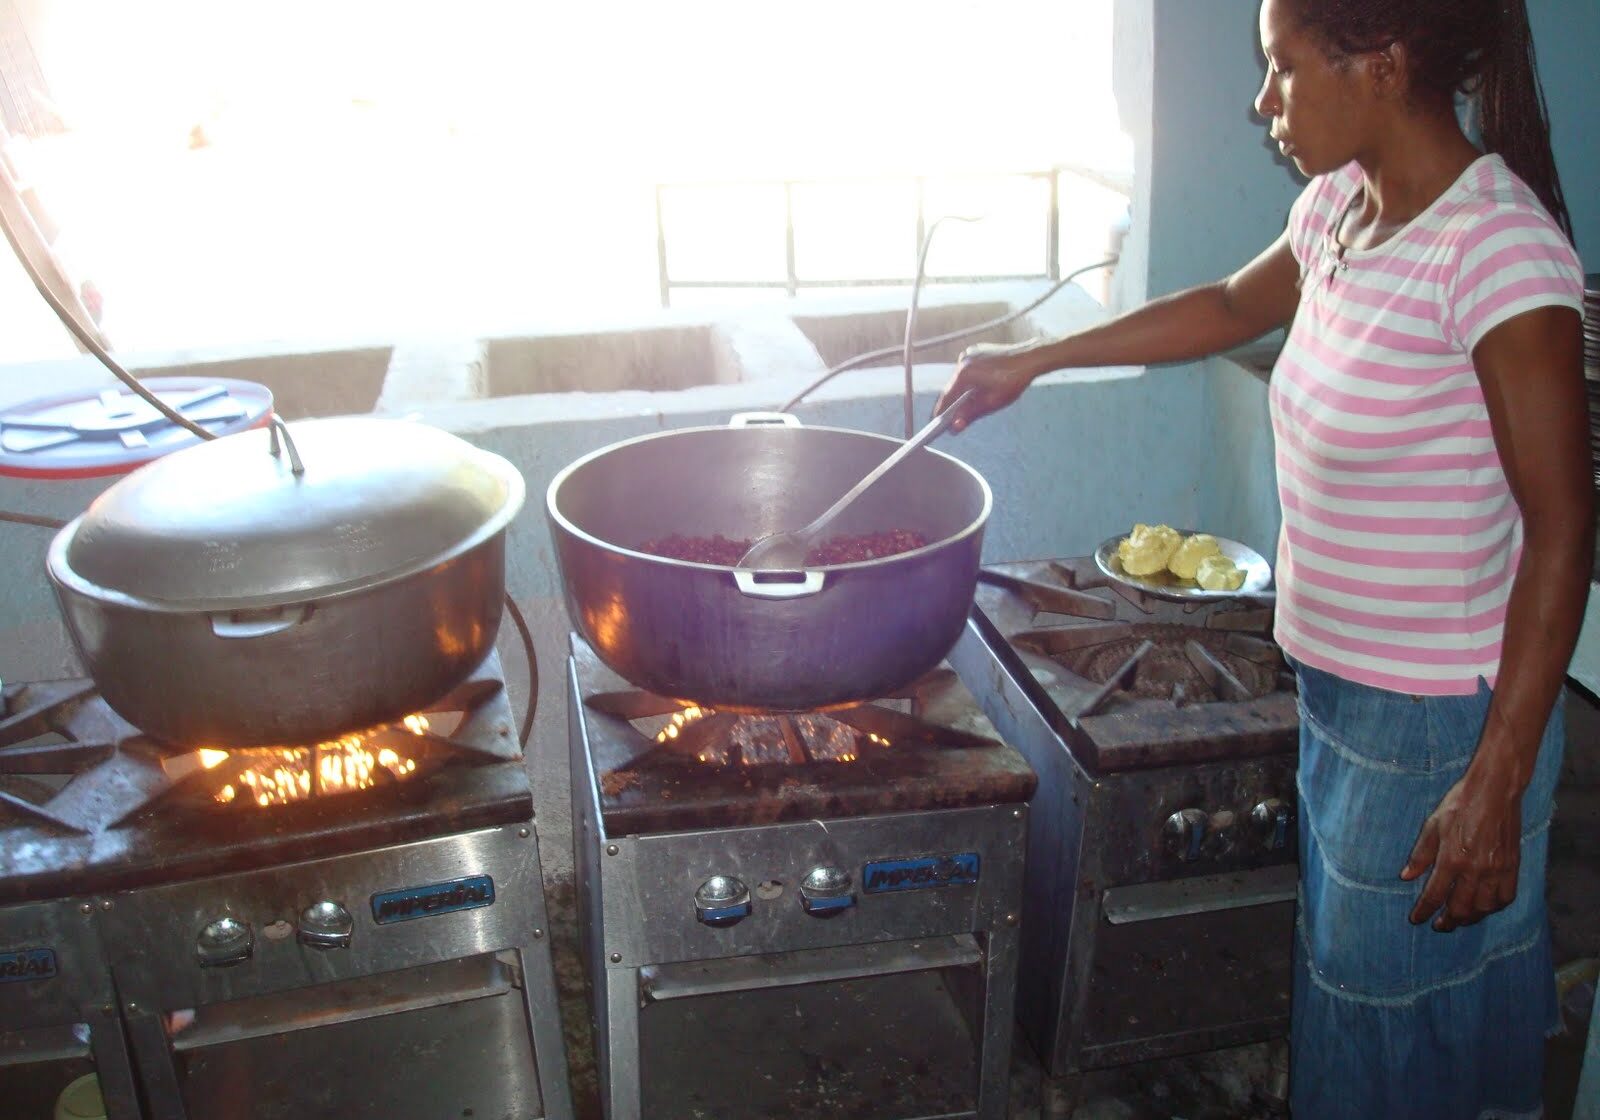 A woman preparing food in a kitchen.